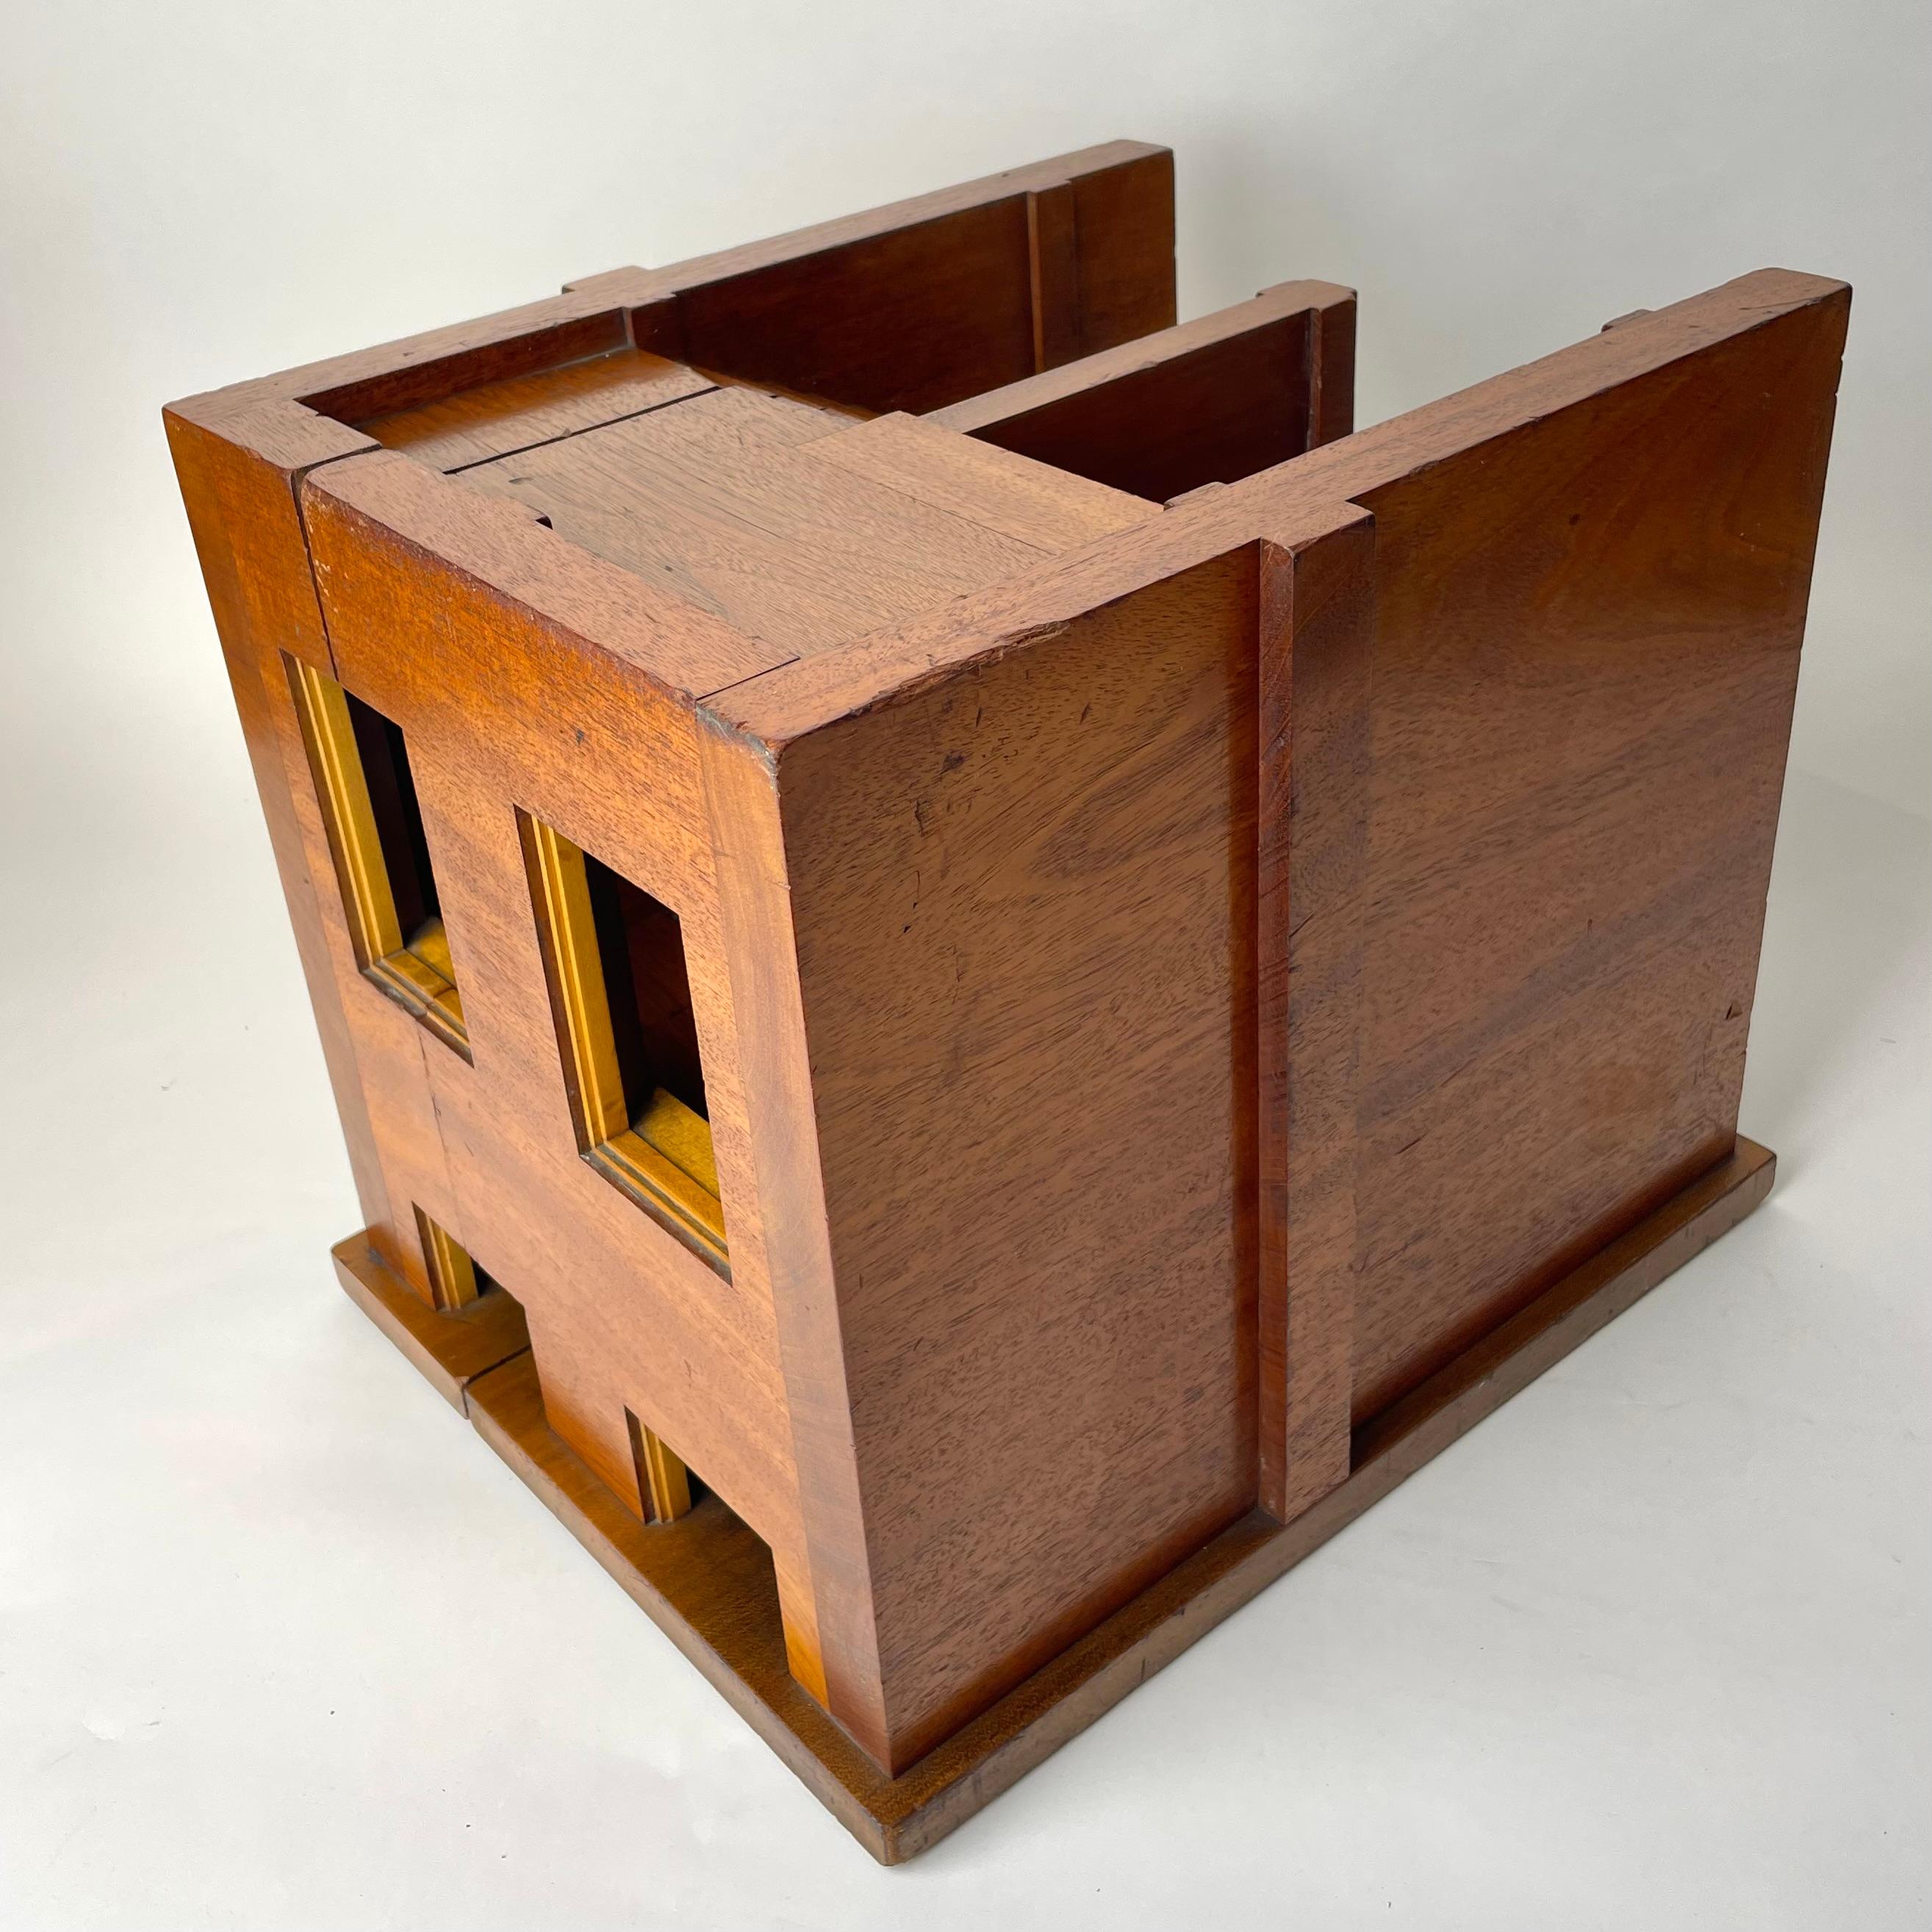 Mahogany Staircase Section Architectural Model, Late 19th/Early 20th C England. For Sale 12